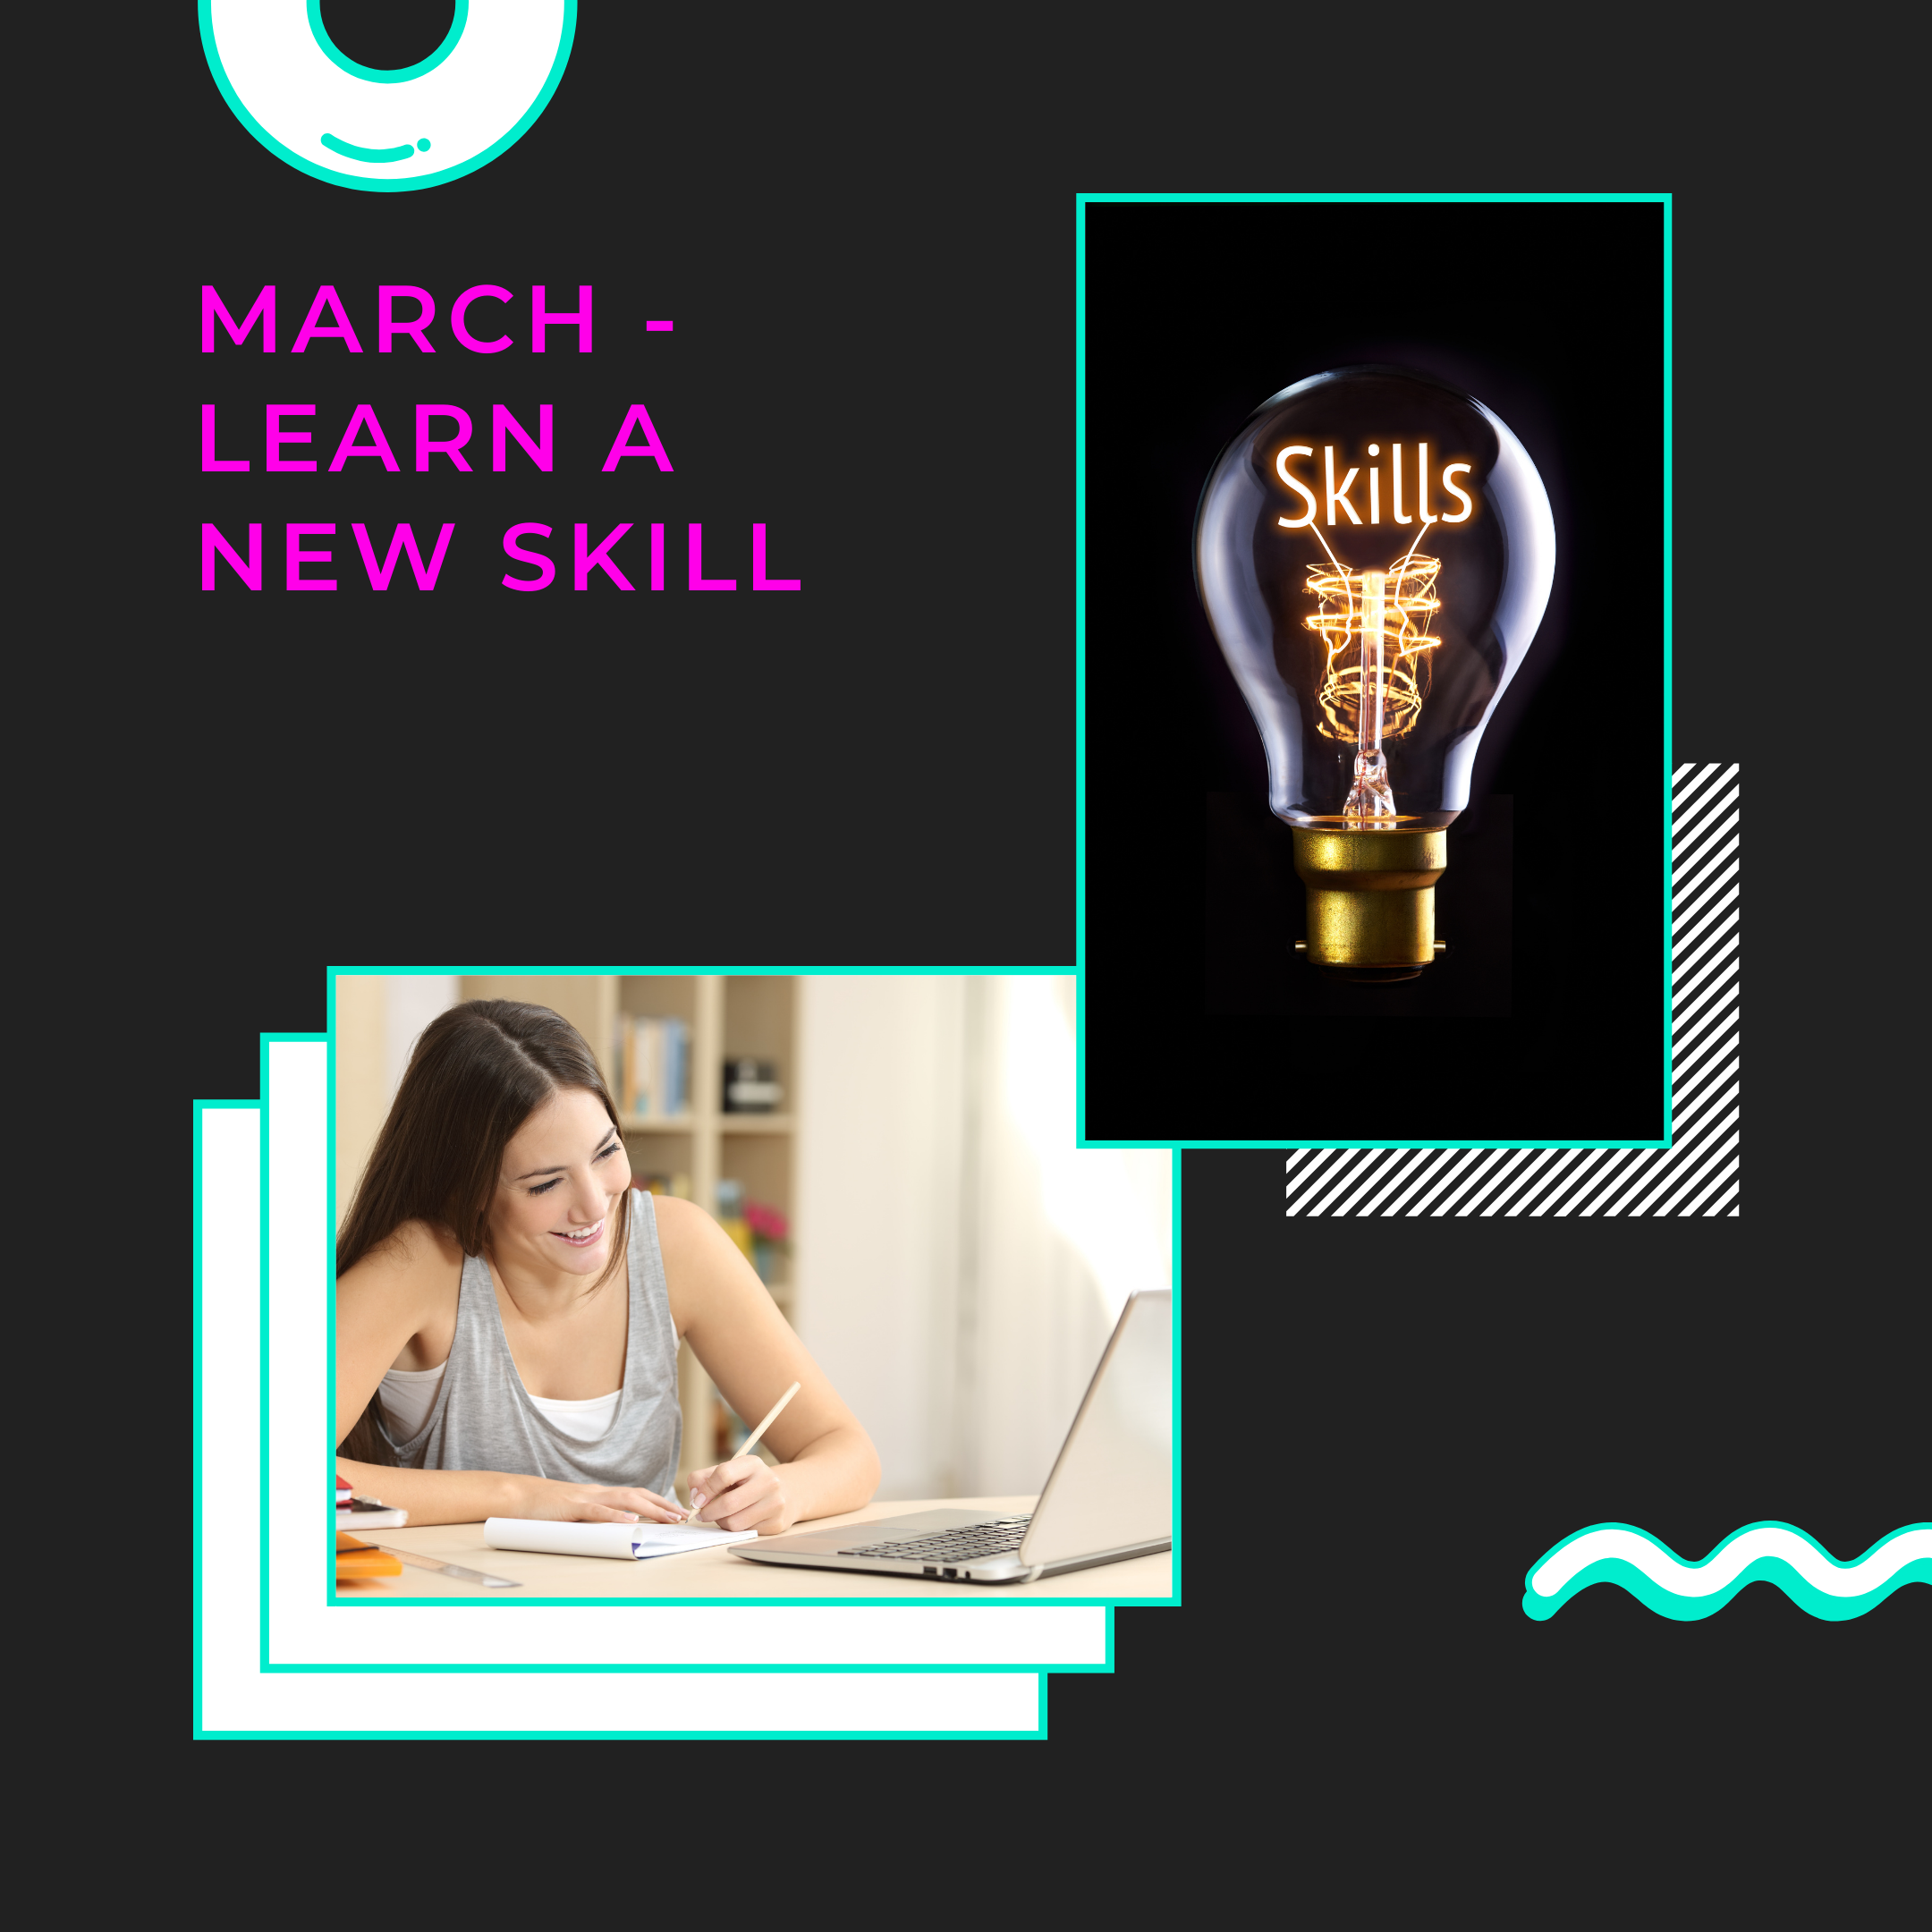 Learn a new skill in March